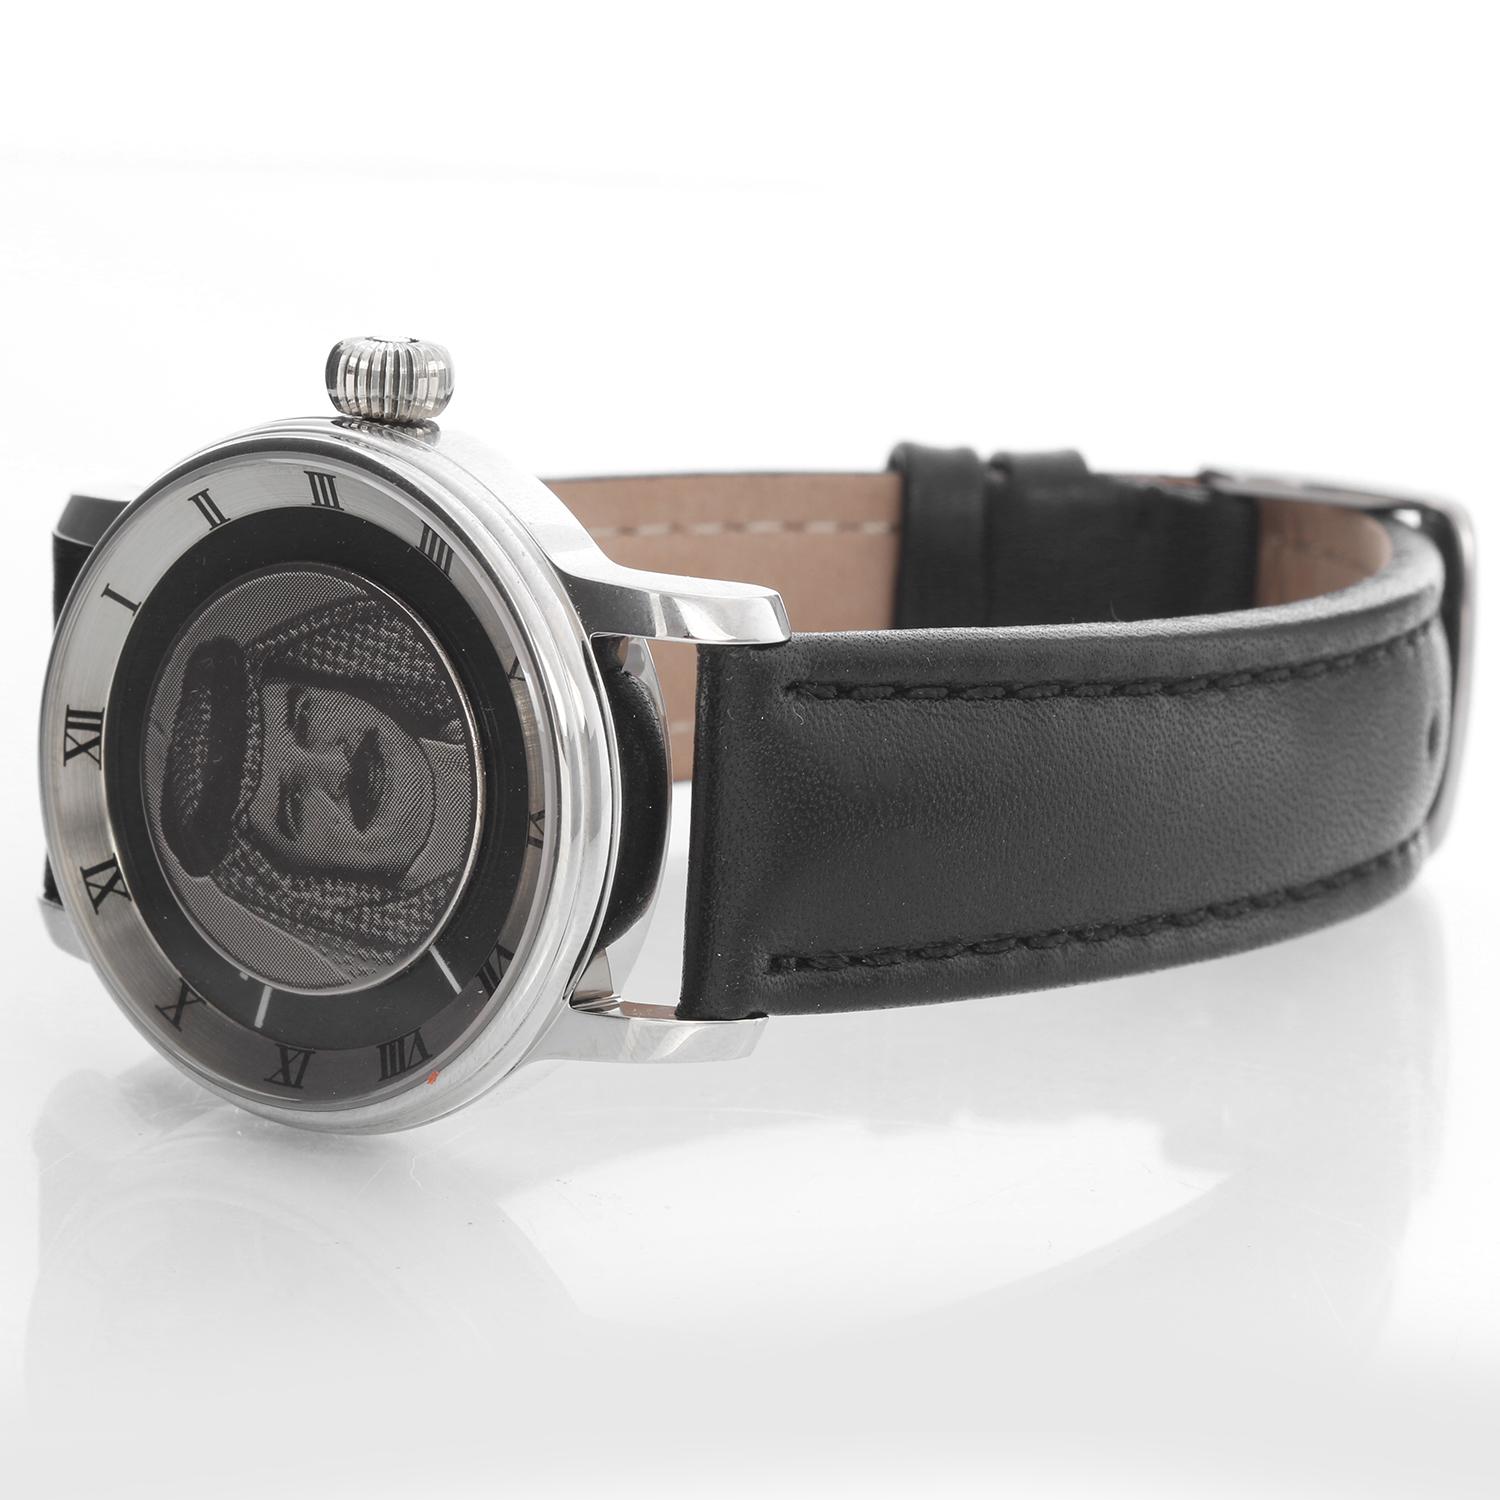 Etoile Stainless Steel  King of Bahrain Men's Watch - Automatic. Stainless Steel ( 38 mm ). King of Bahrain; Hamad bin Isa Al Khalifa with Roman numerals. Black leather strap with tang buckle. Pre-owned with Etoile box. This was given as a present